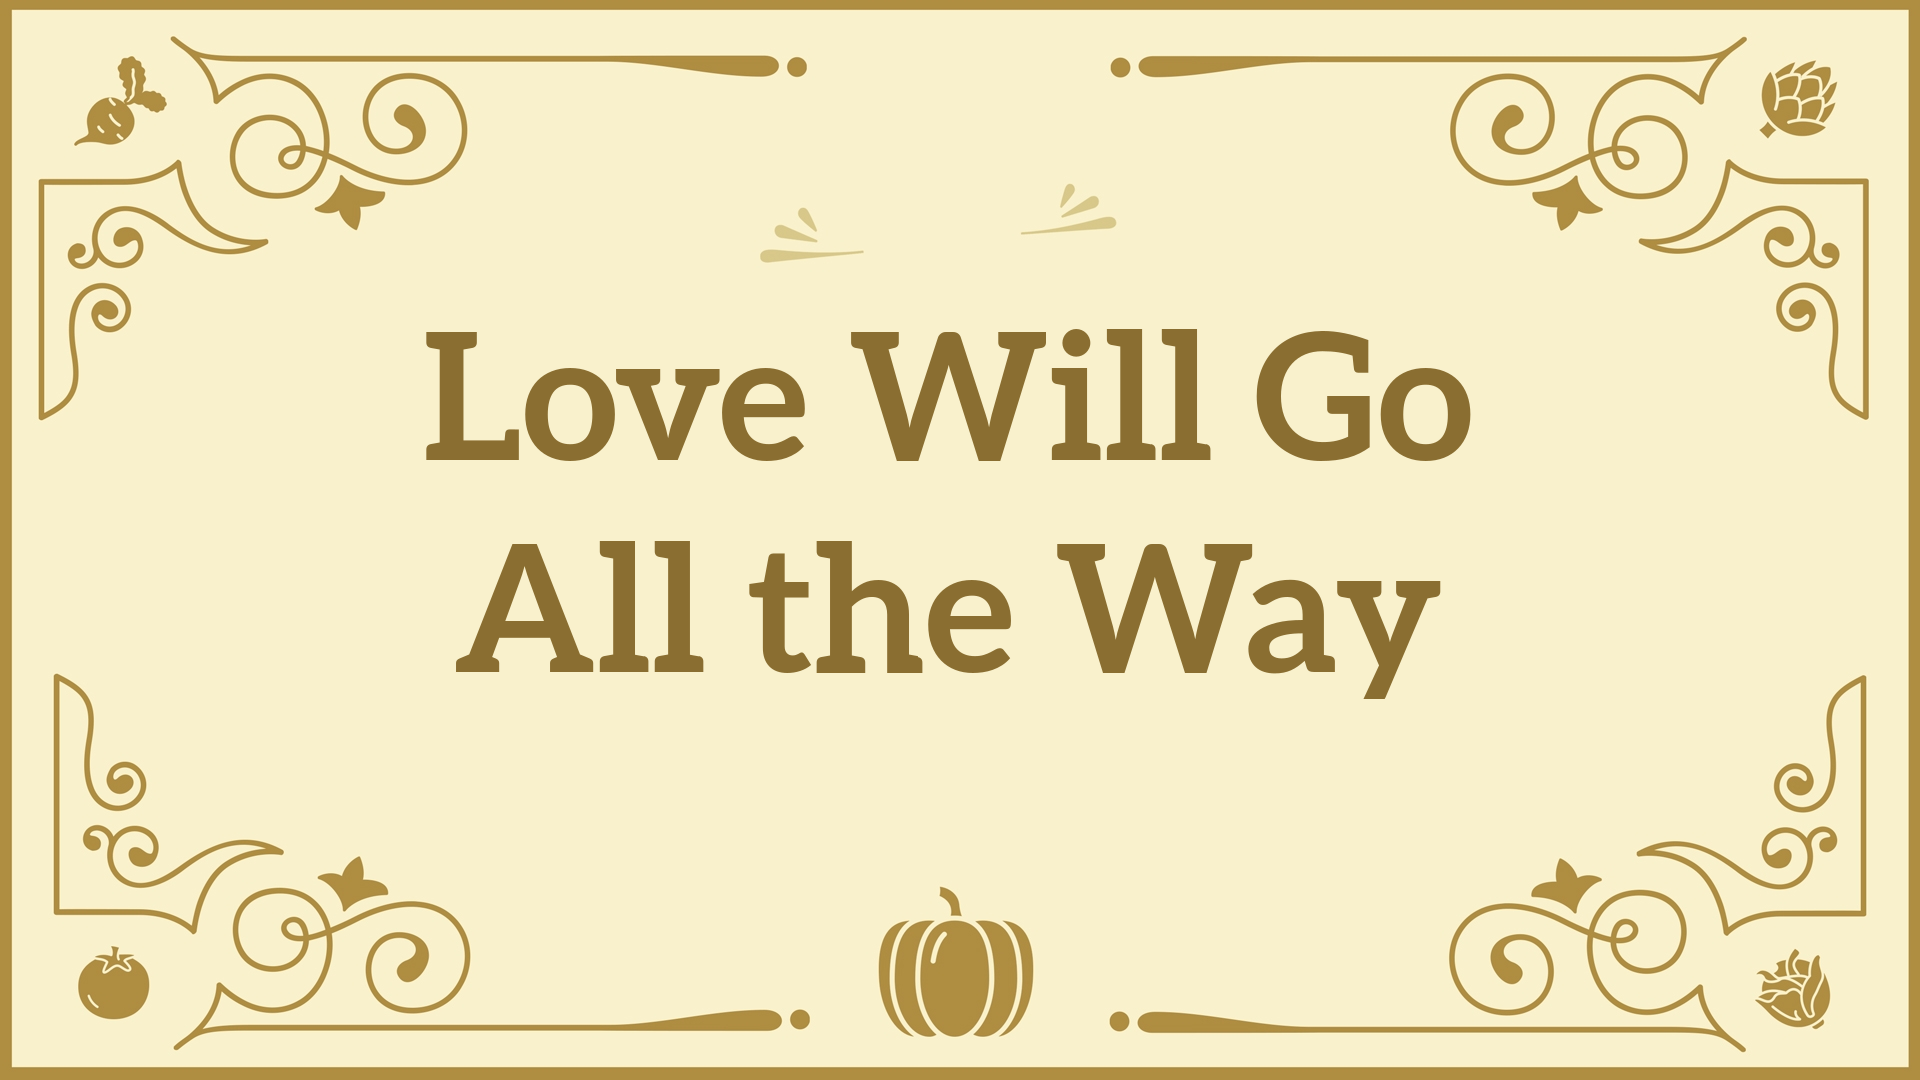 Love Will Go All the Way